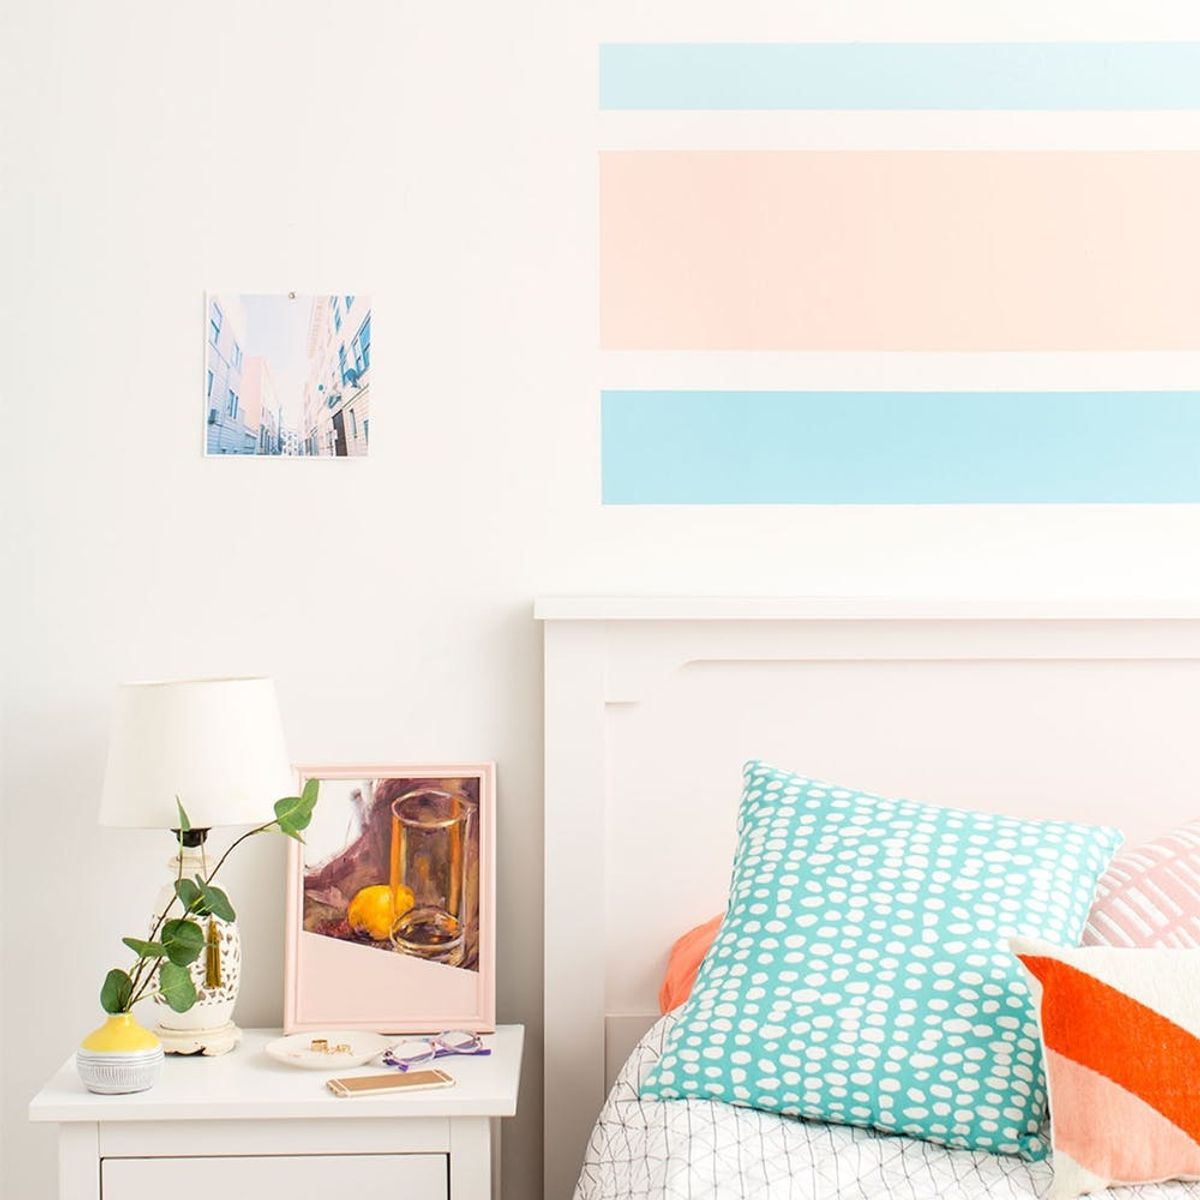 How to Use Your Phone to Totally Transform Your Bedroom Decor